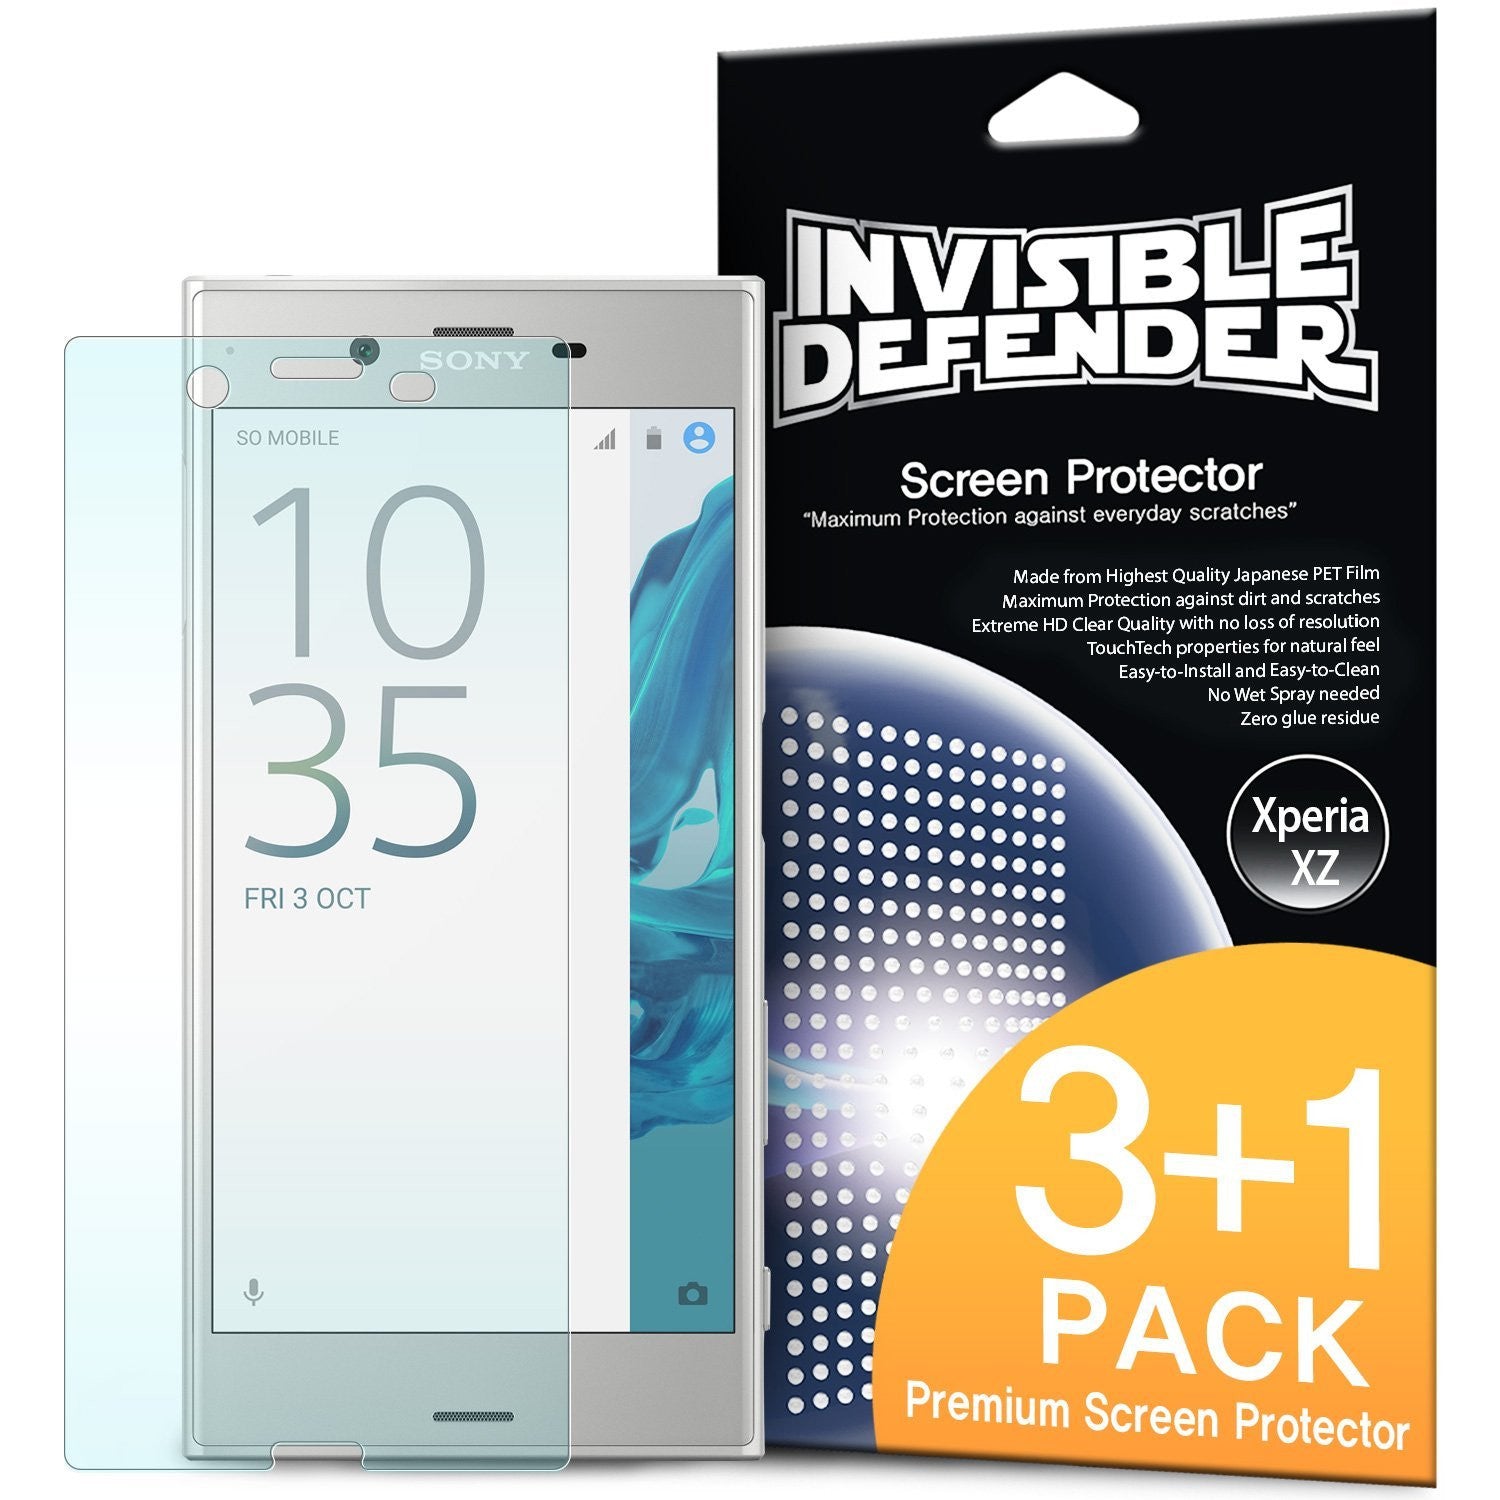 sony xperia xz ringke invisible defender 3 1 pack screen protector